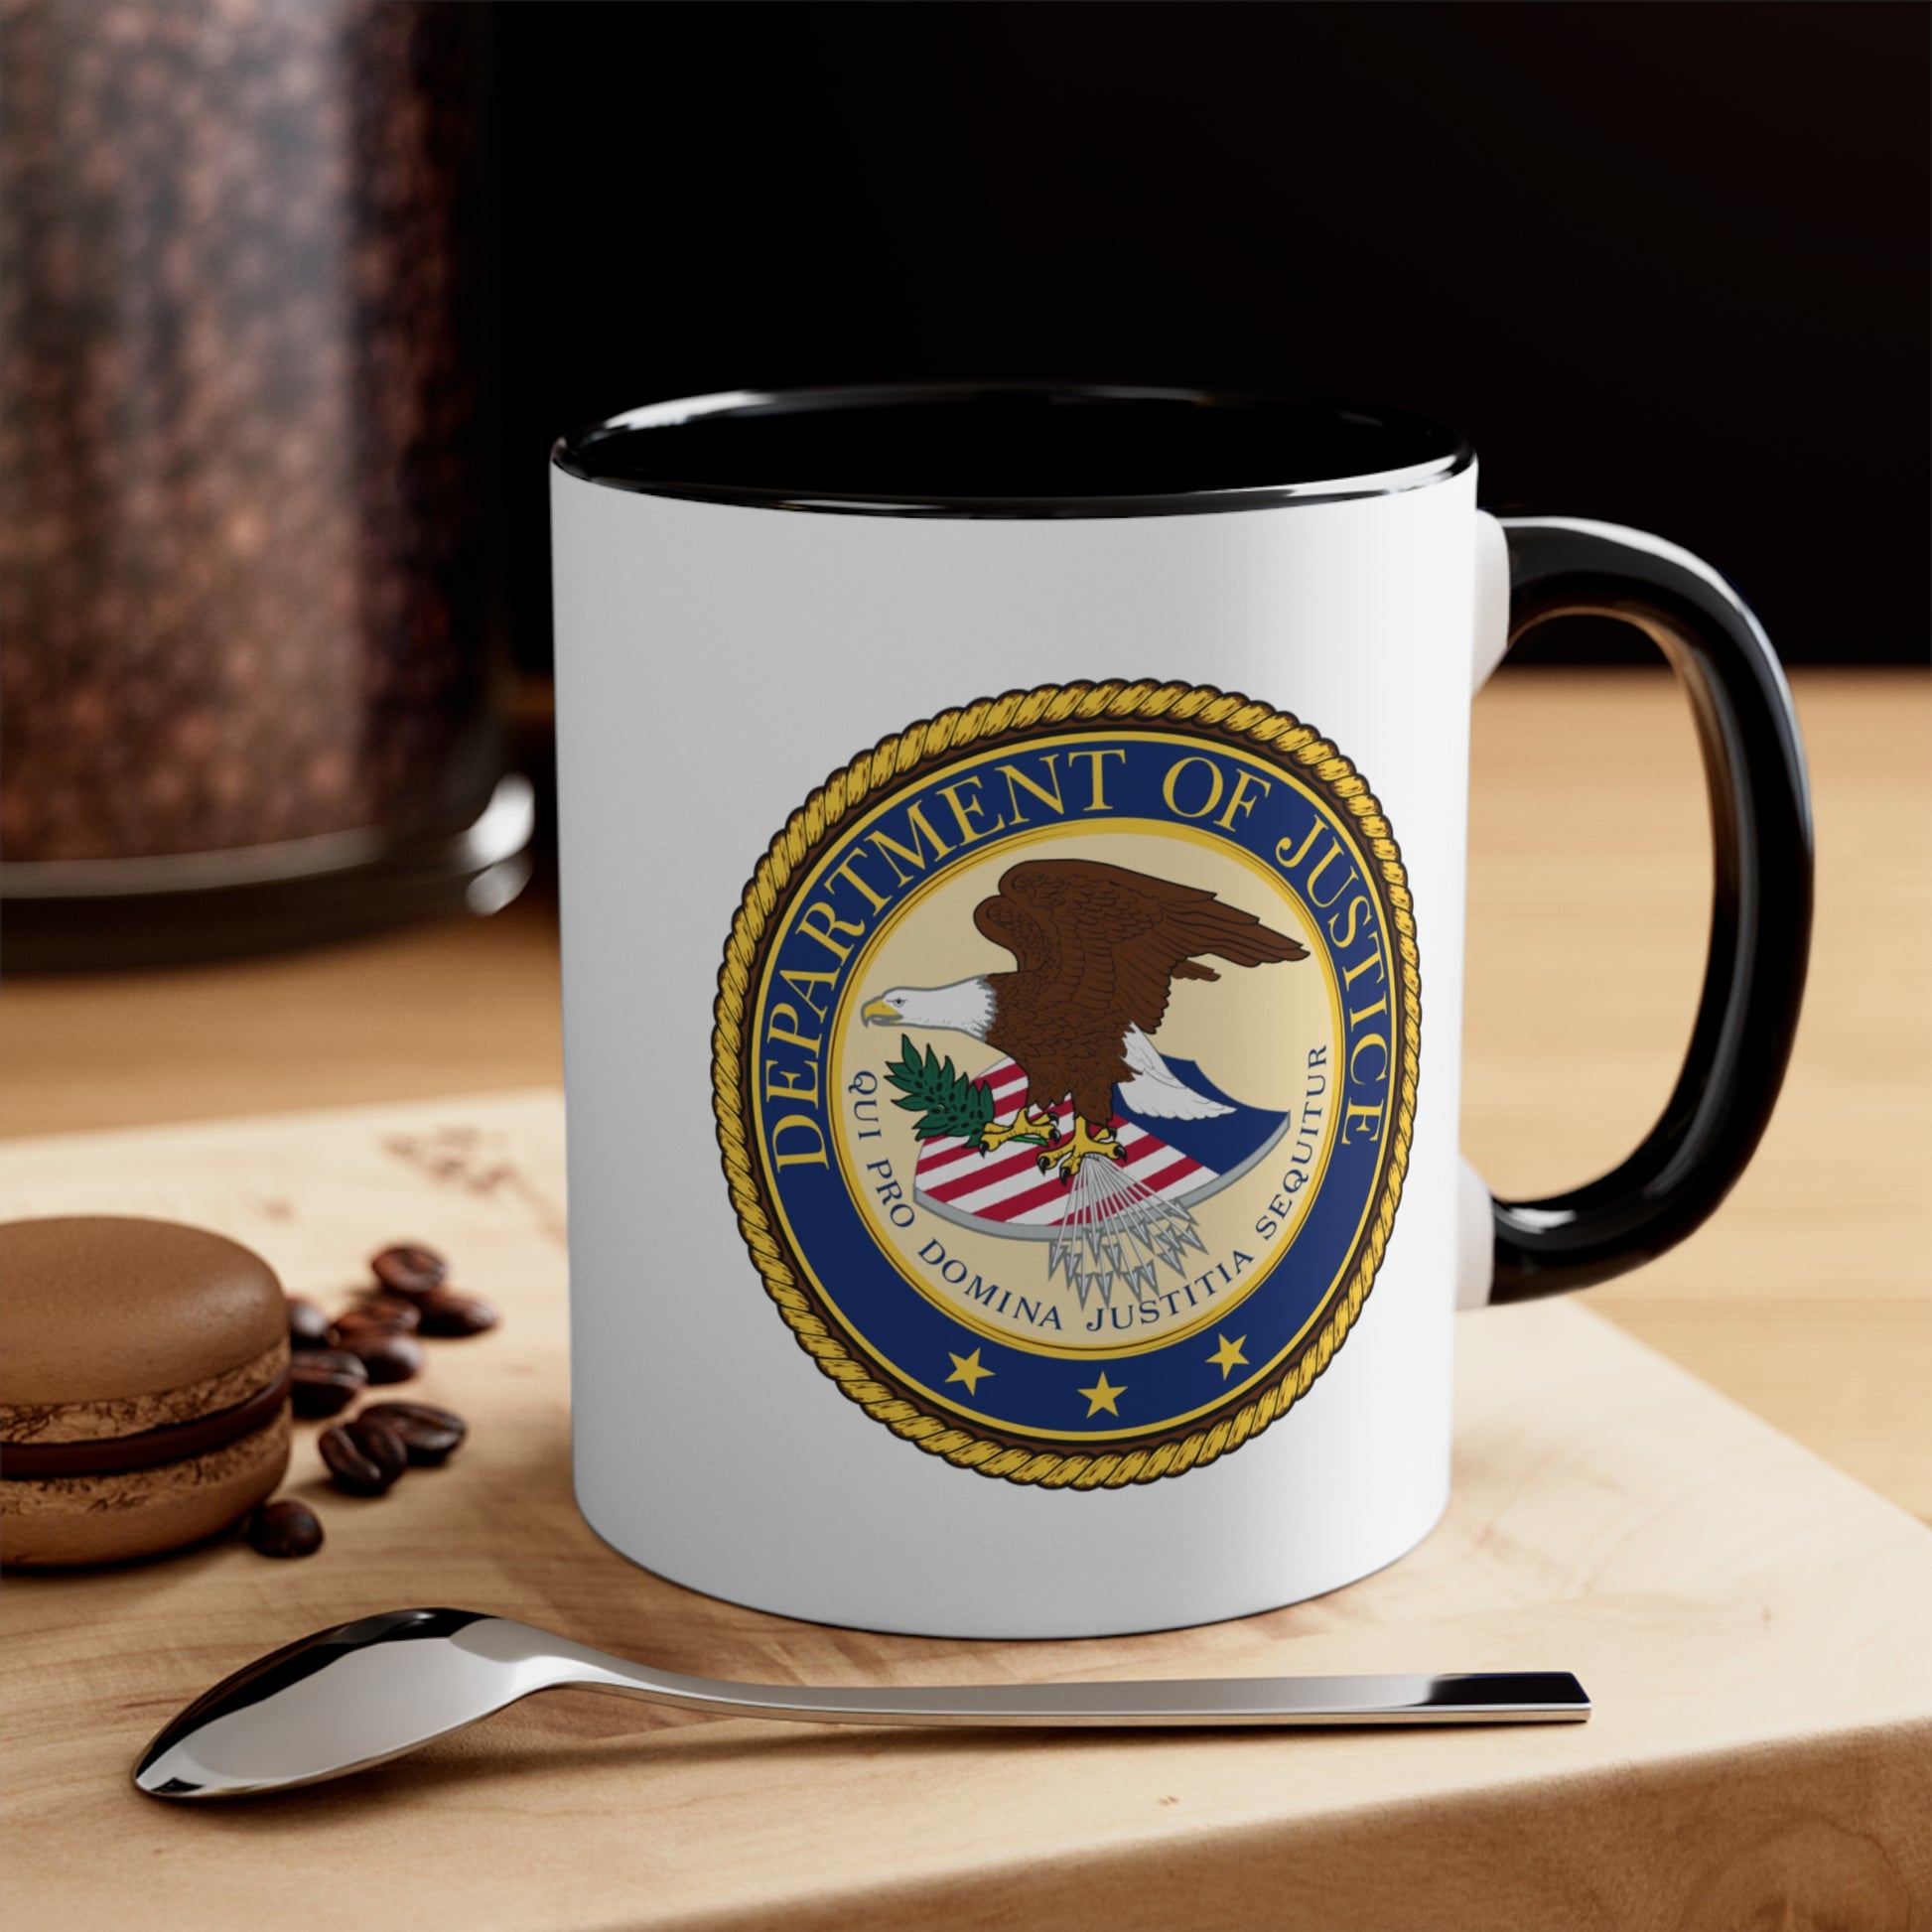 Department of Justice Coffee Mug - Double Sided Black Accent White Ceramic 11oz by TheGlassyLass